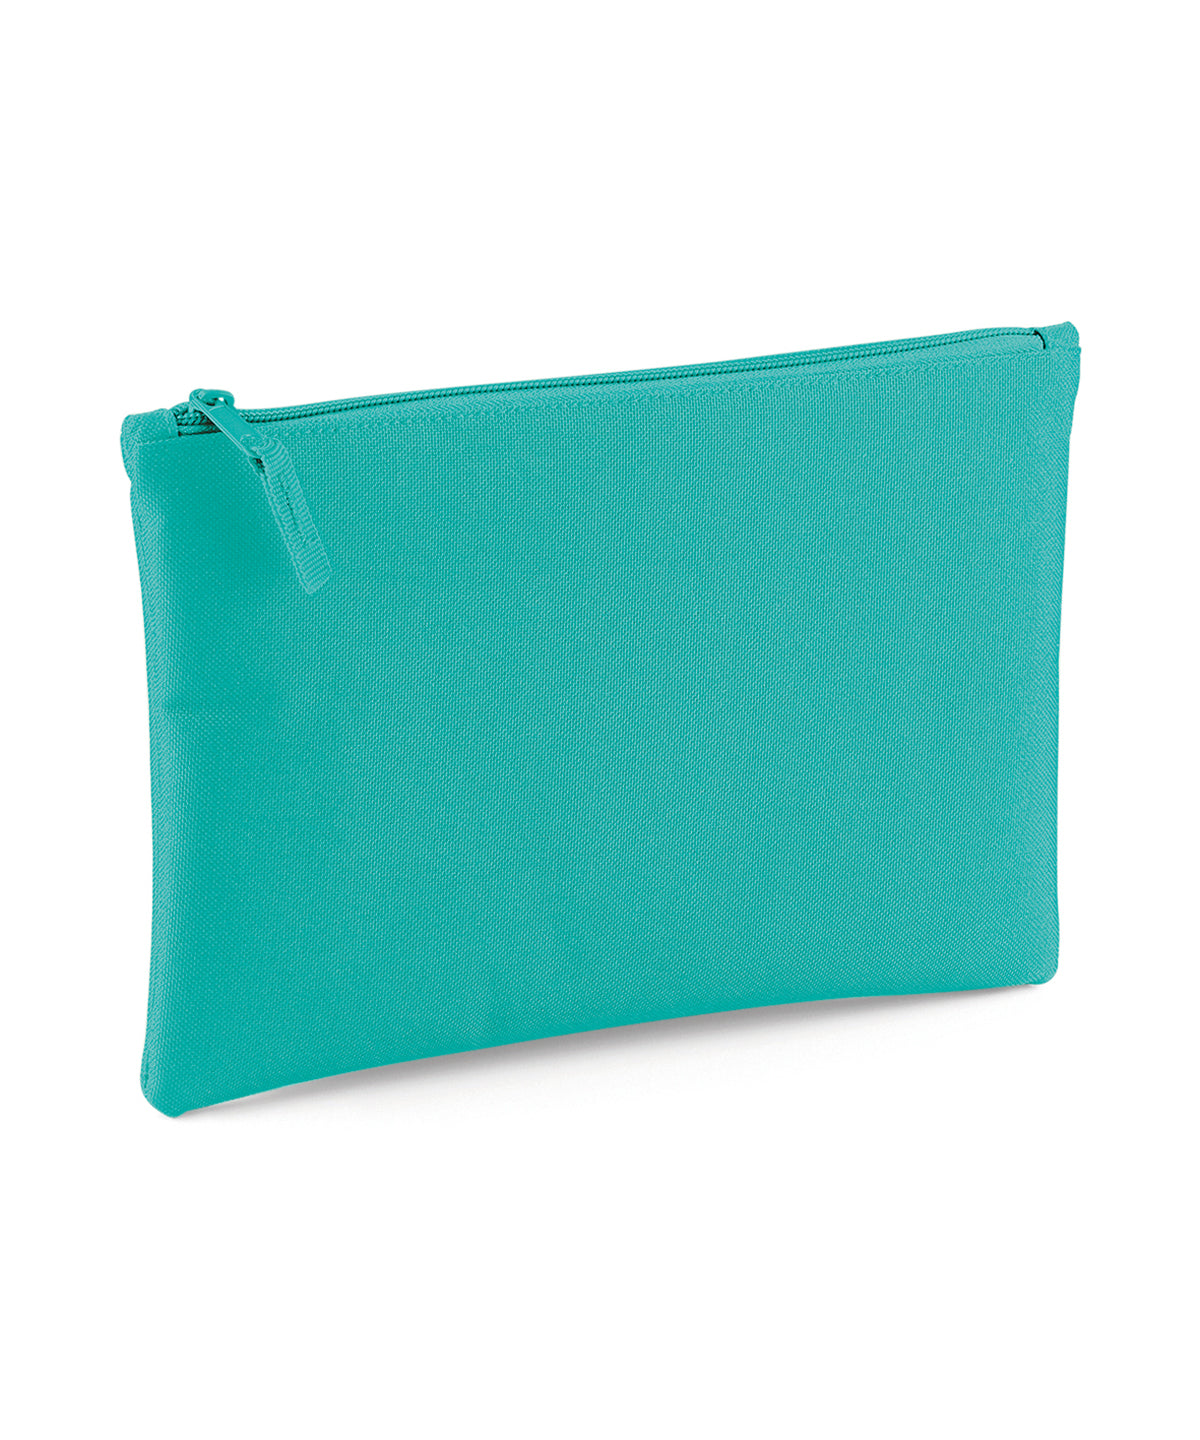 Personalised Bags - Mint Bagbase Grab pouch